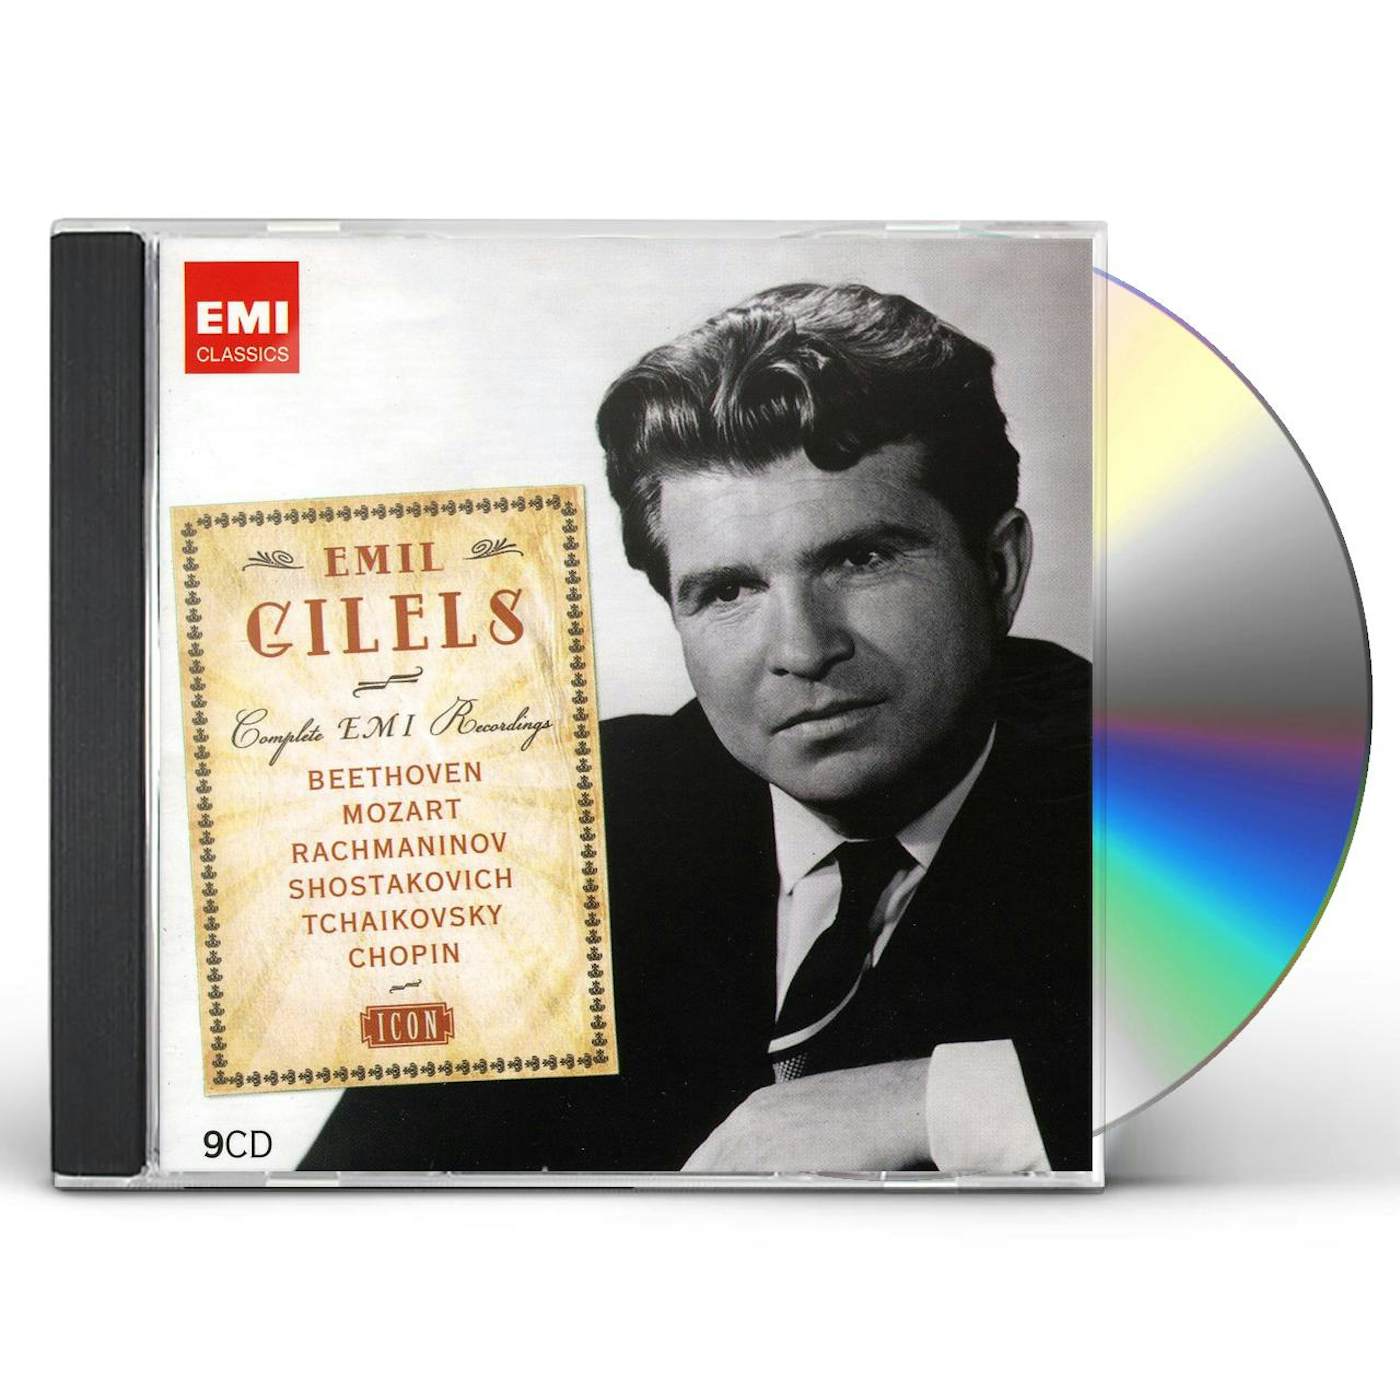 Emil Gilels ICON CD